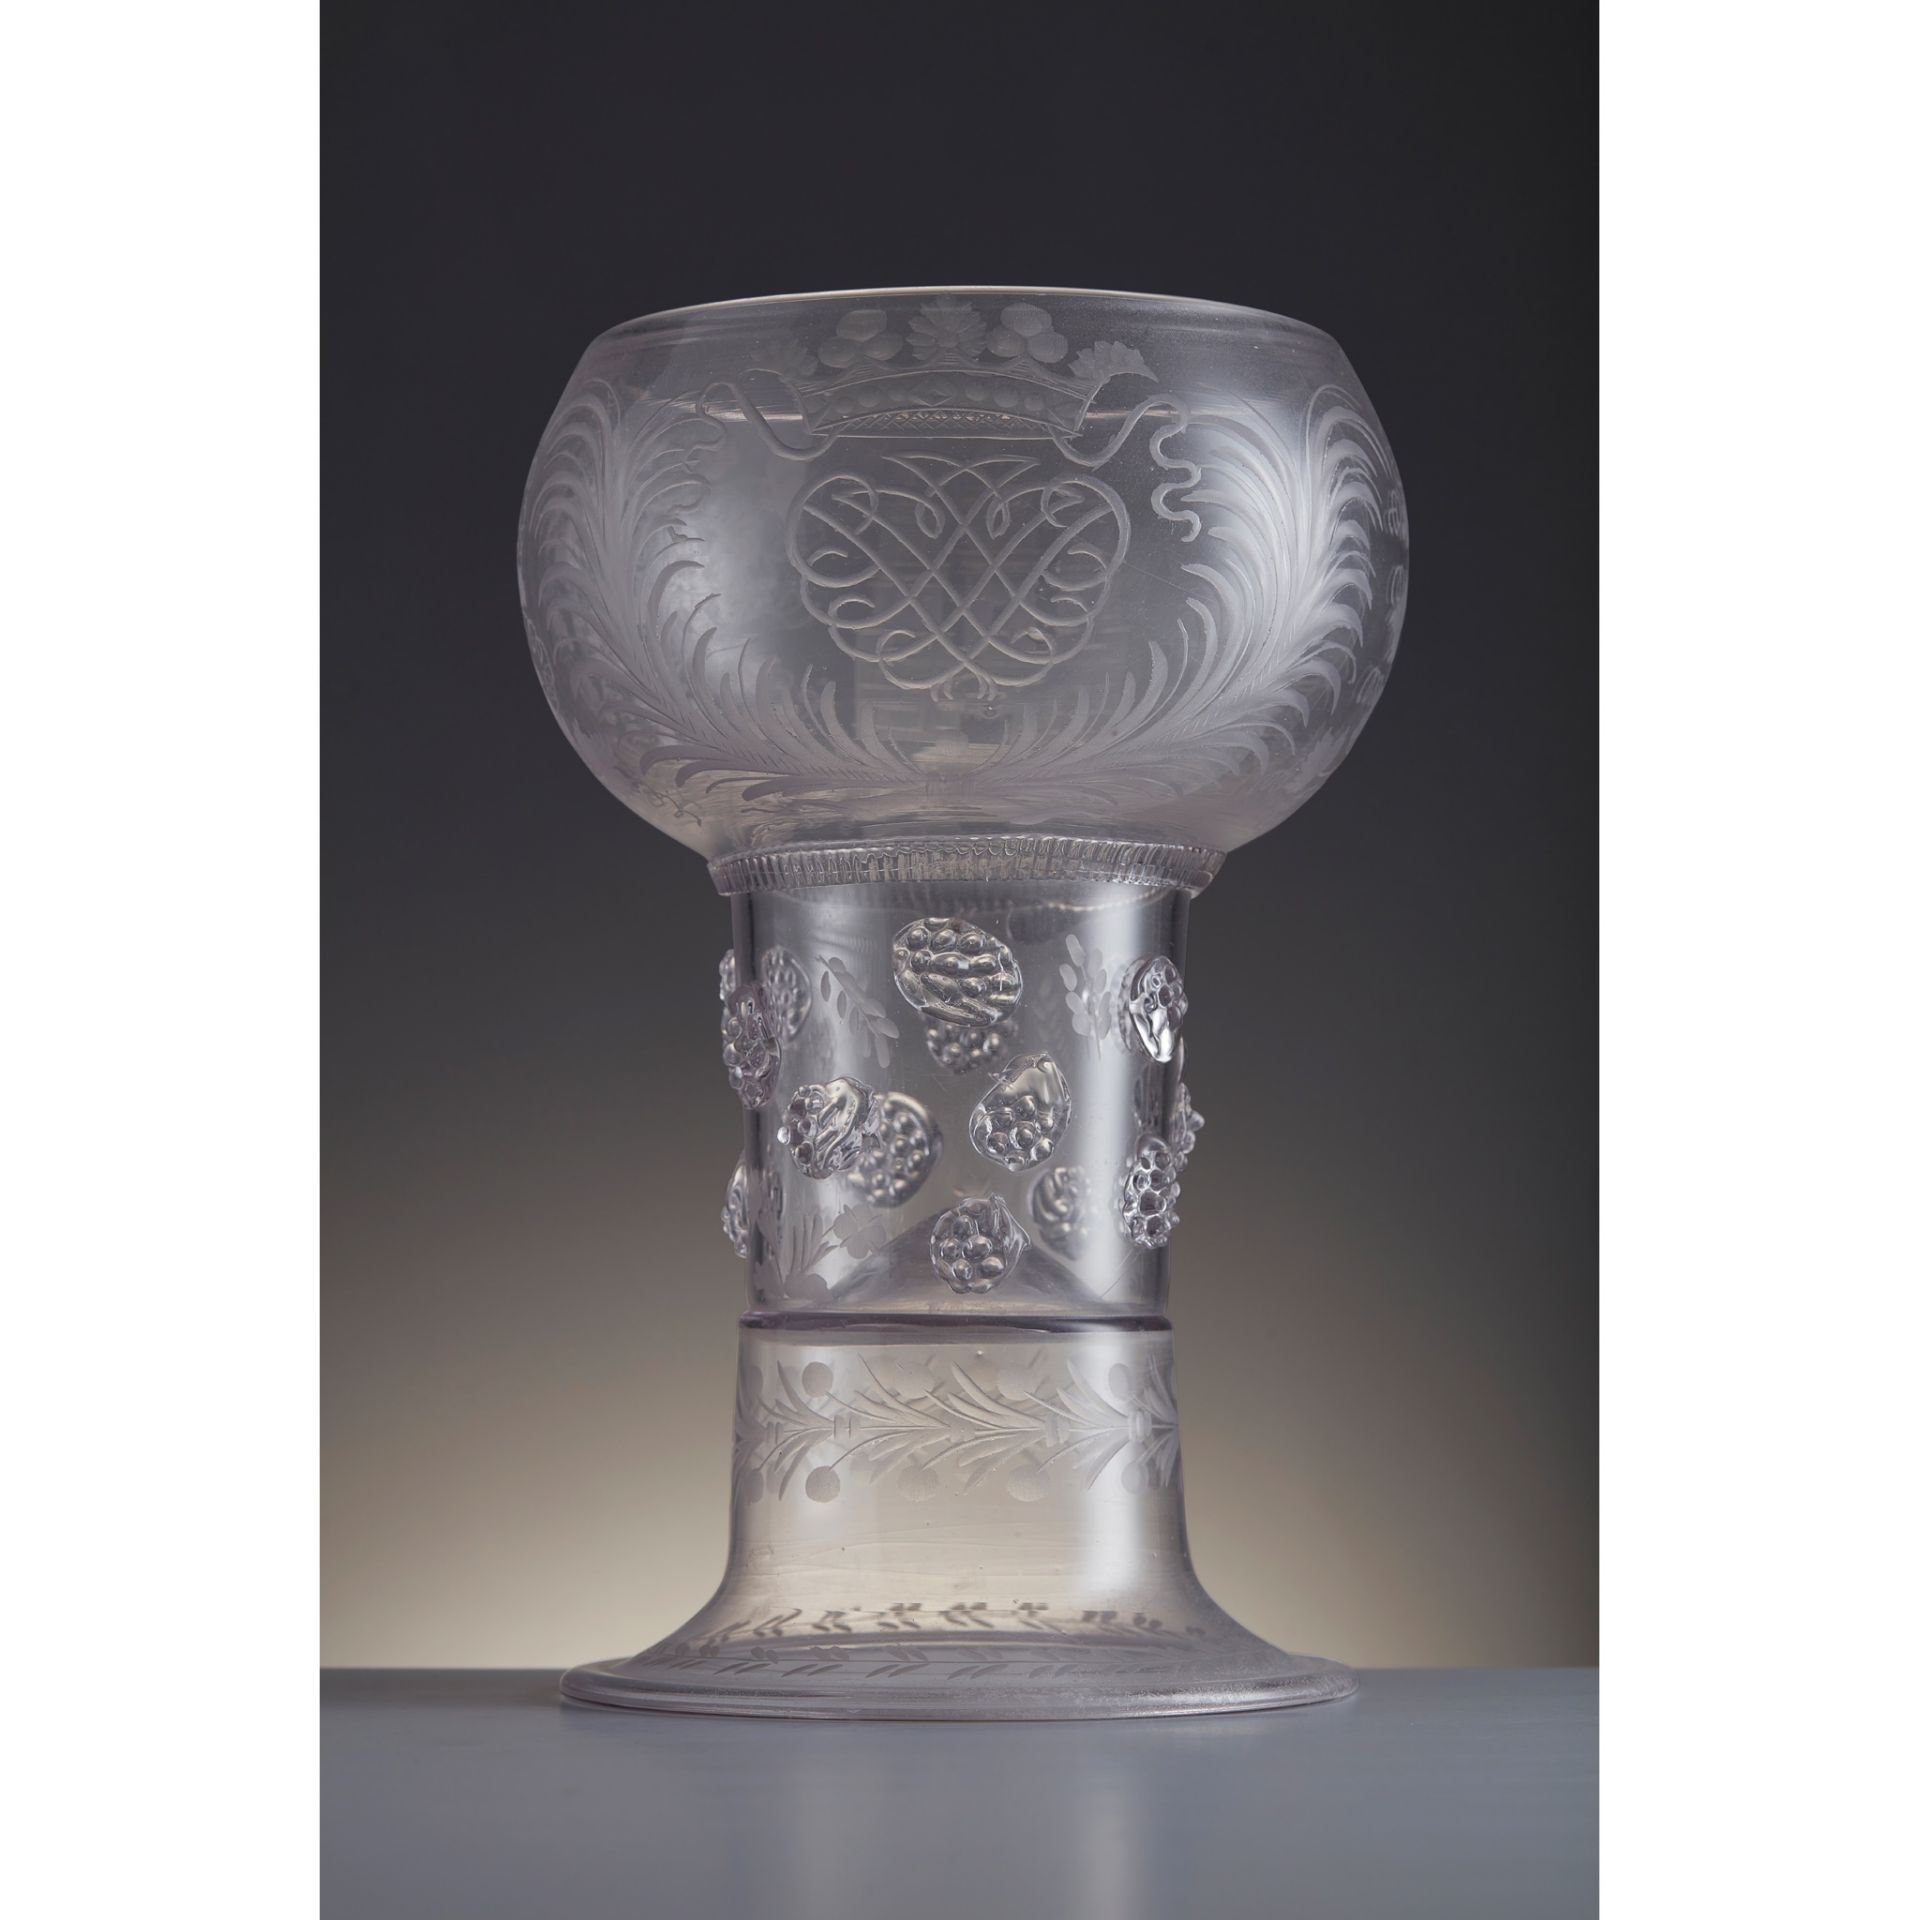 LARGE CLEAR GLASS ROEMER BEARING THE BREADALBANE CYPHER DUTCH OR GERMAN, LATE 17TH / EARLY 18TH - Bild 3 aus 4